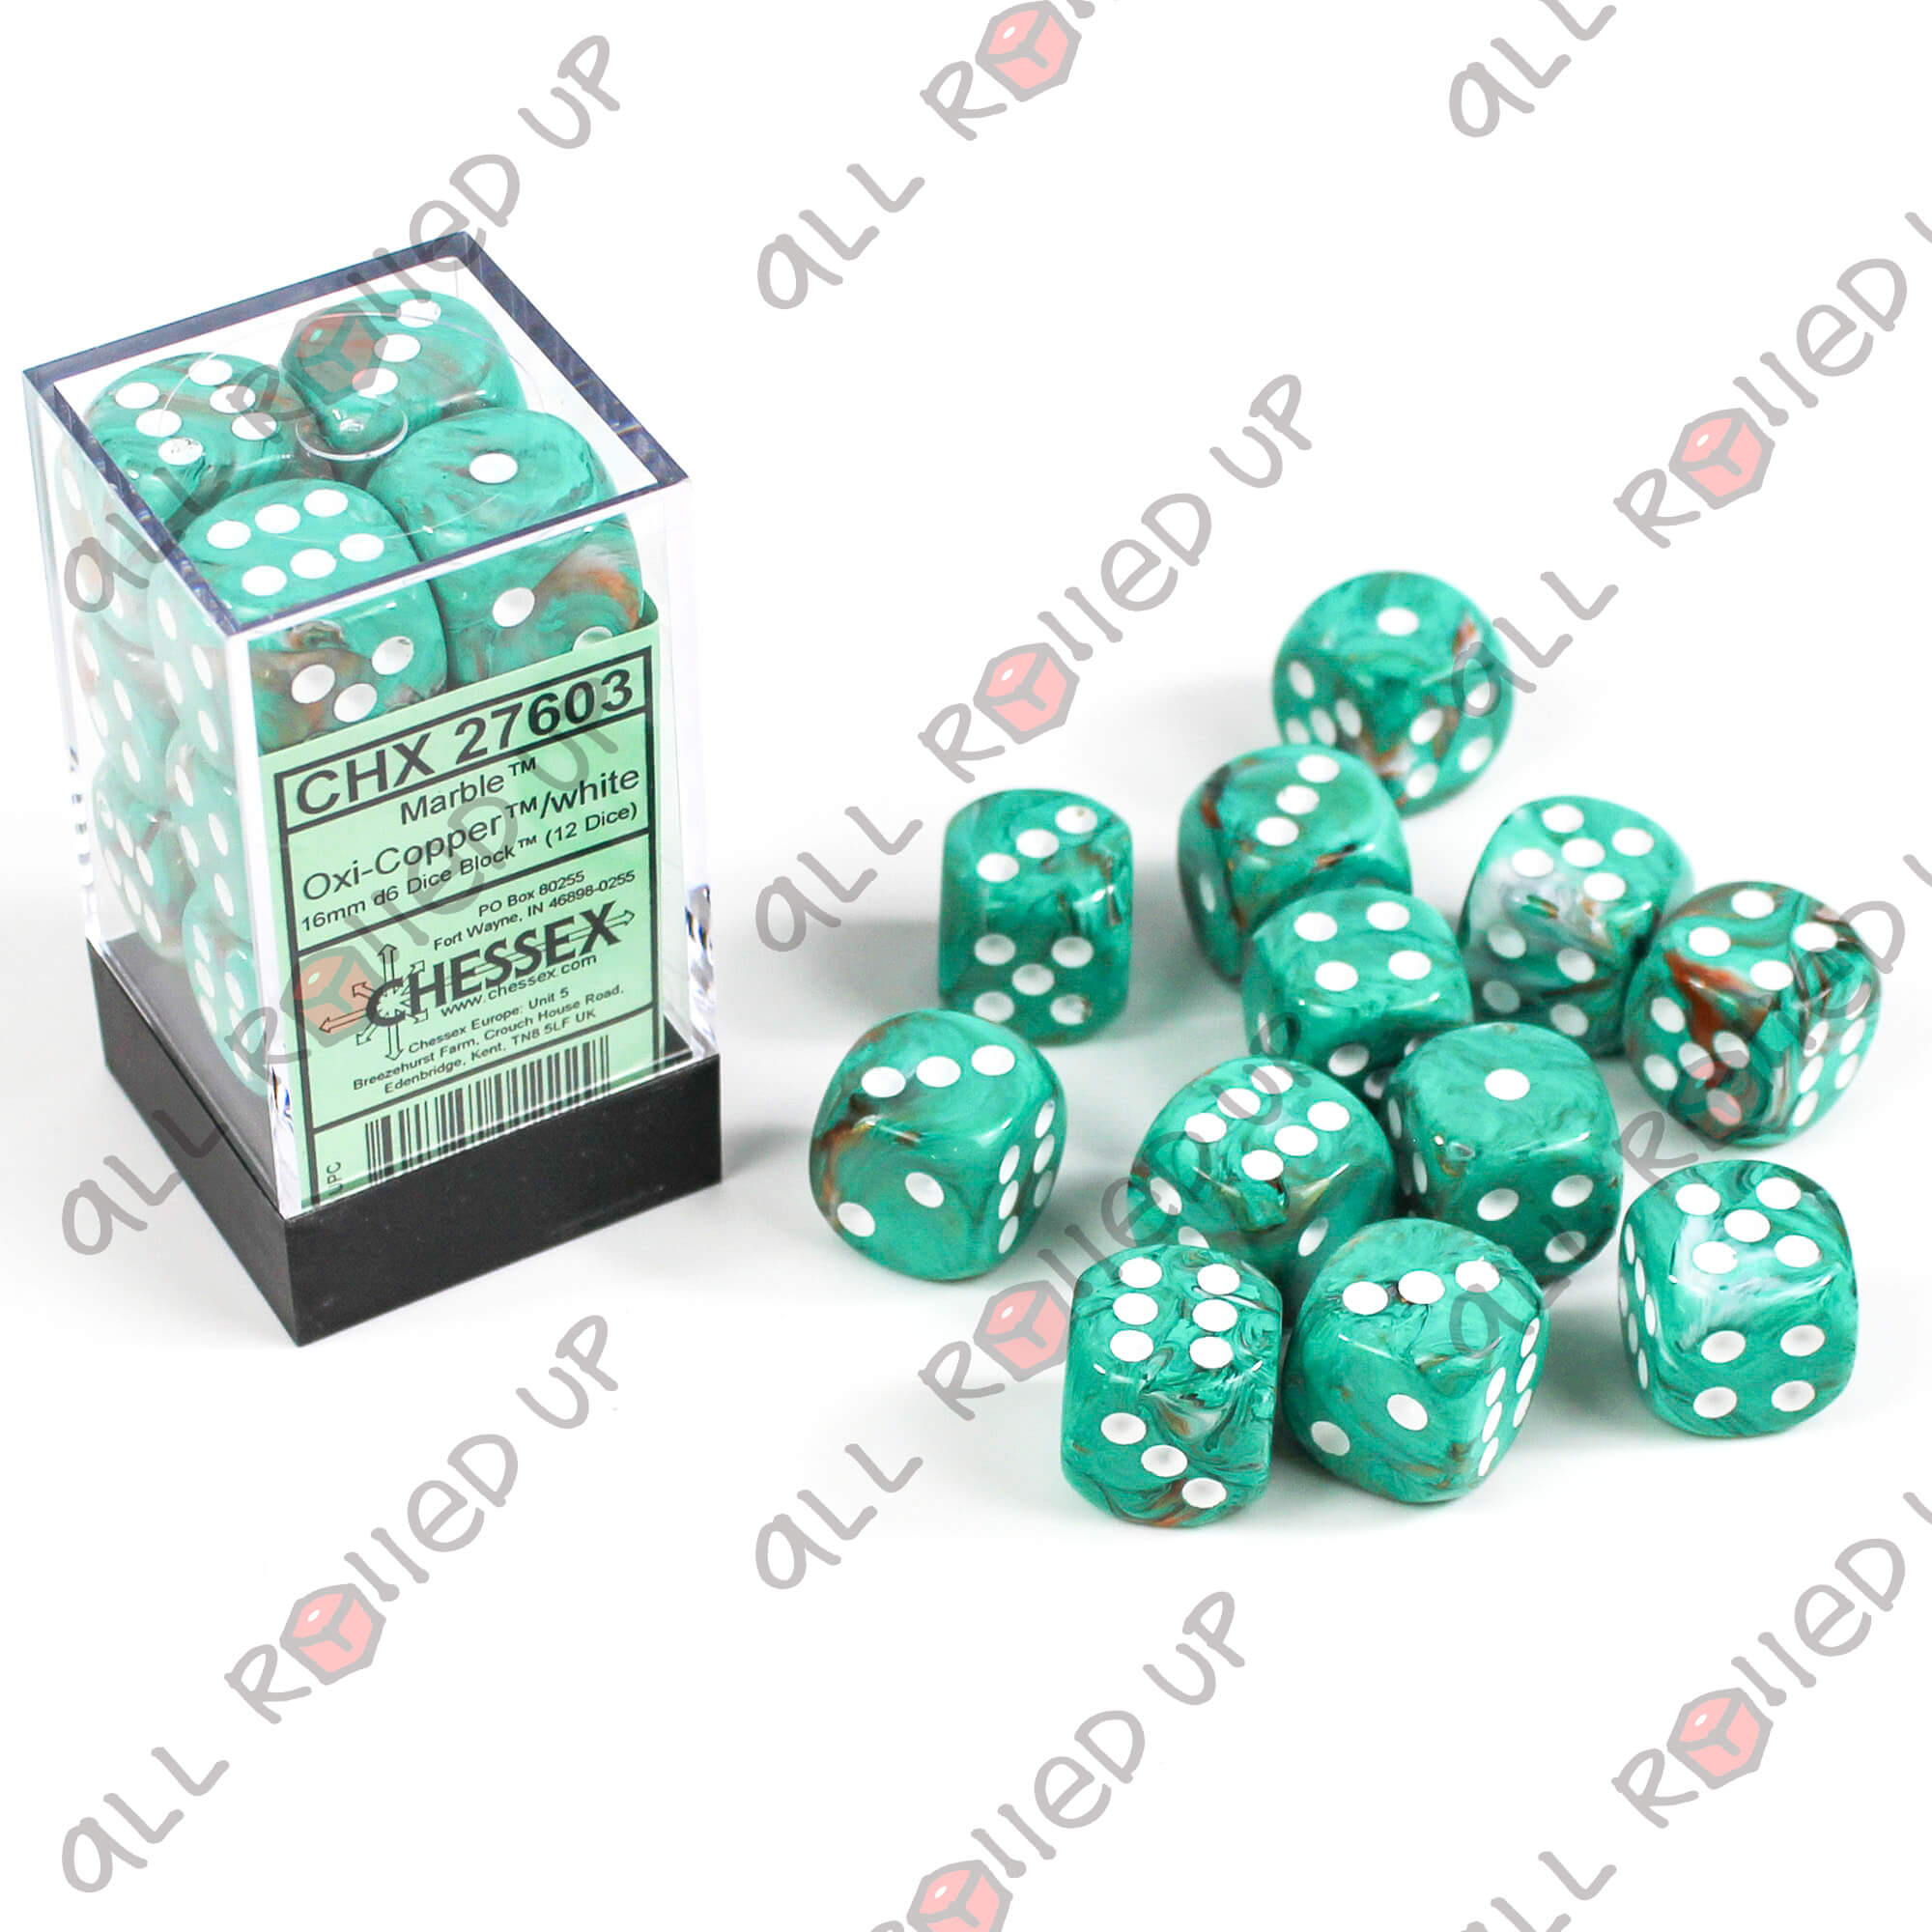 Chessex Marble 12mm D6 Dice Set Oxi-Copper with White 